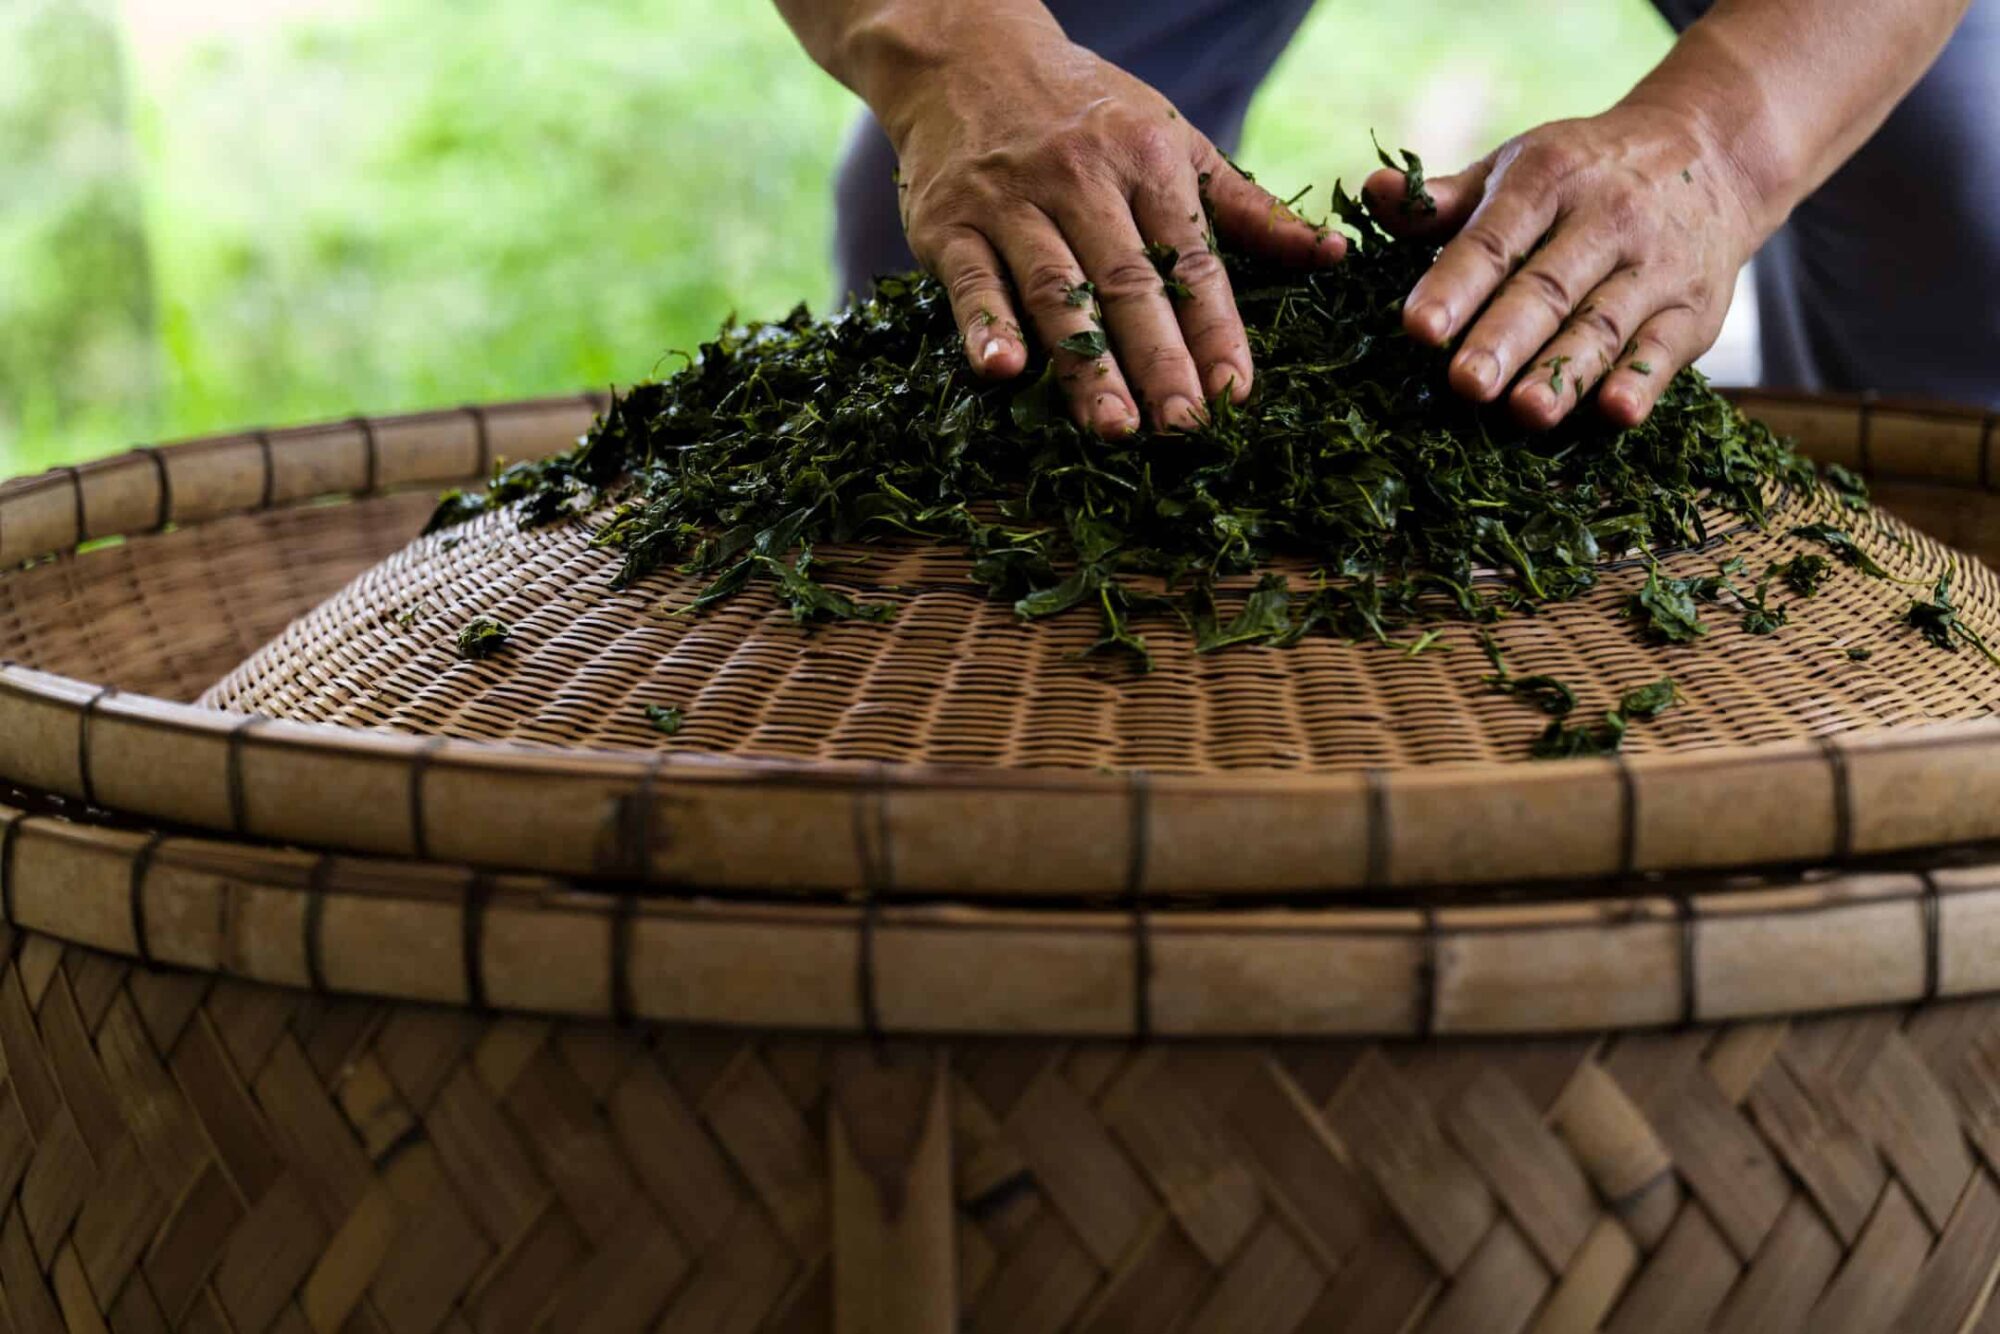 New tea picking and kettle roasting experience in a tea plantation